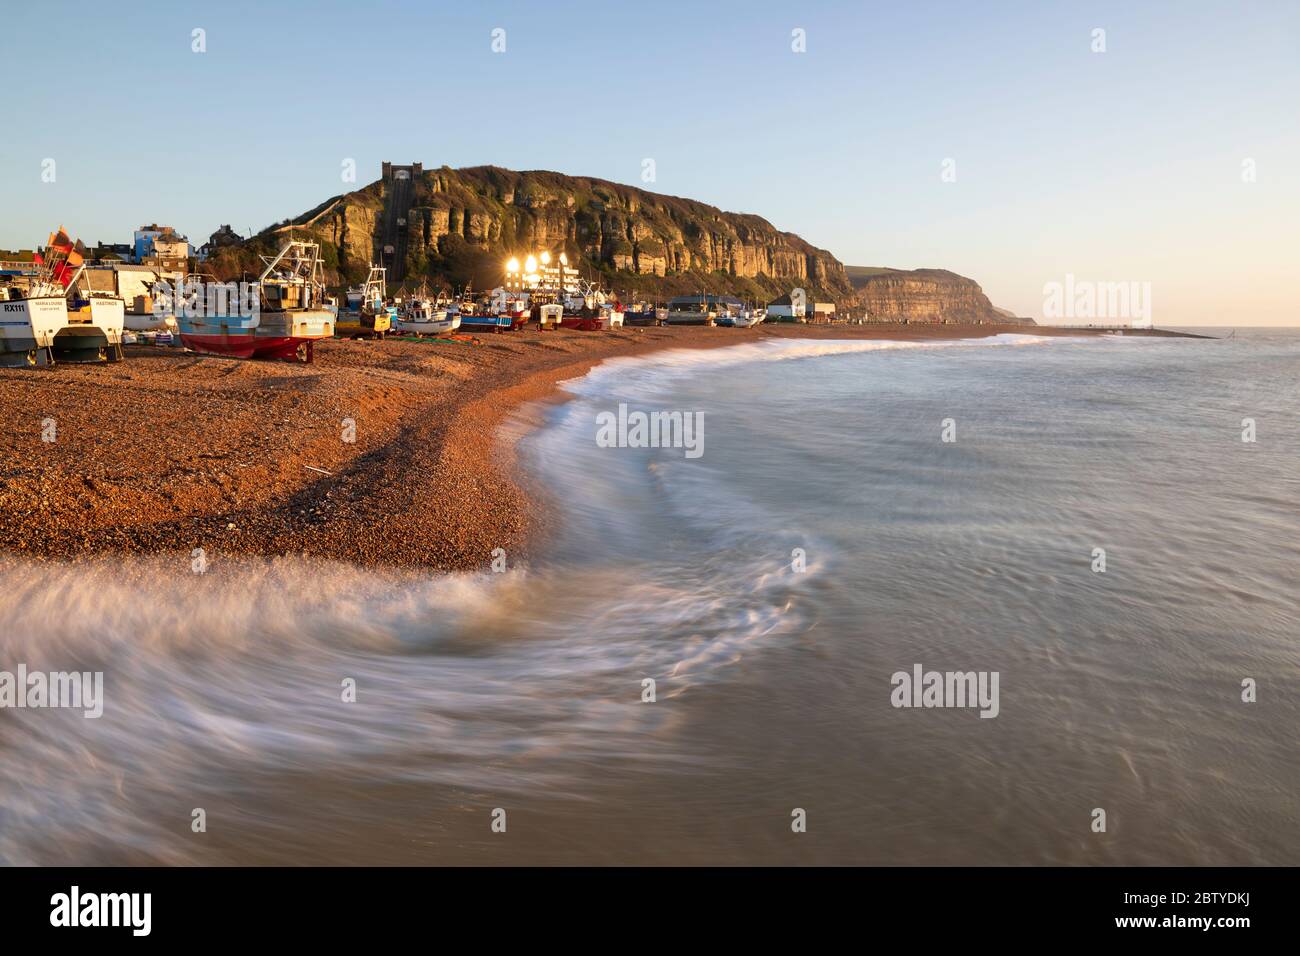 Fishing boats on beach at The Stade with breaking waves and East Hill behind at sunrise, Hastings, East Sussex, England, United Kingdom, Europe Stock Photo